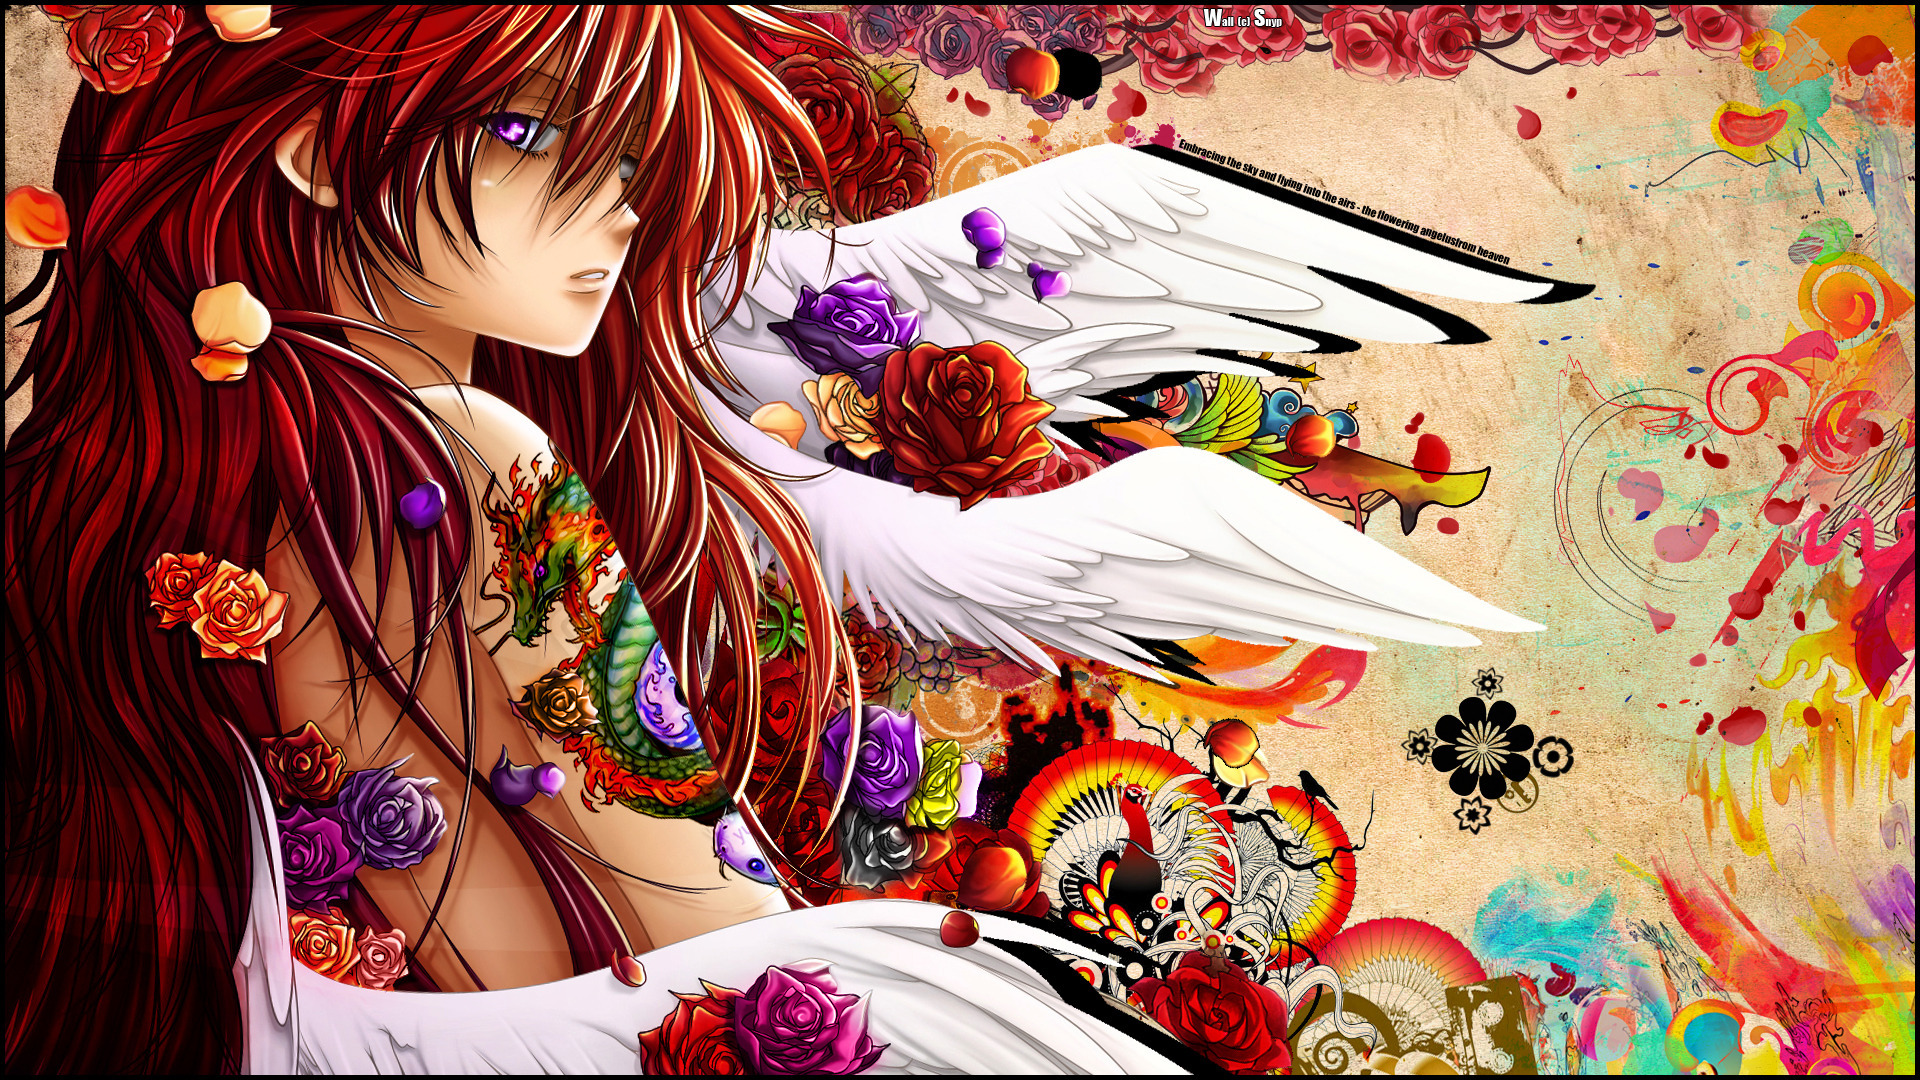 Anime angel with a tattoo and colorful flowers, inspired by Shakugan No Shana.